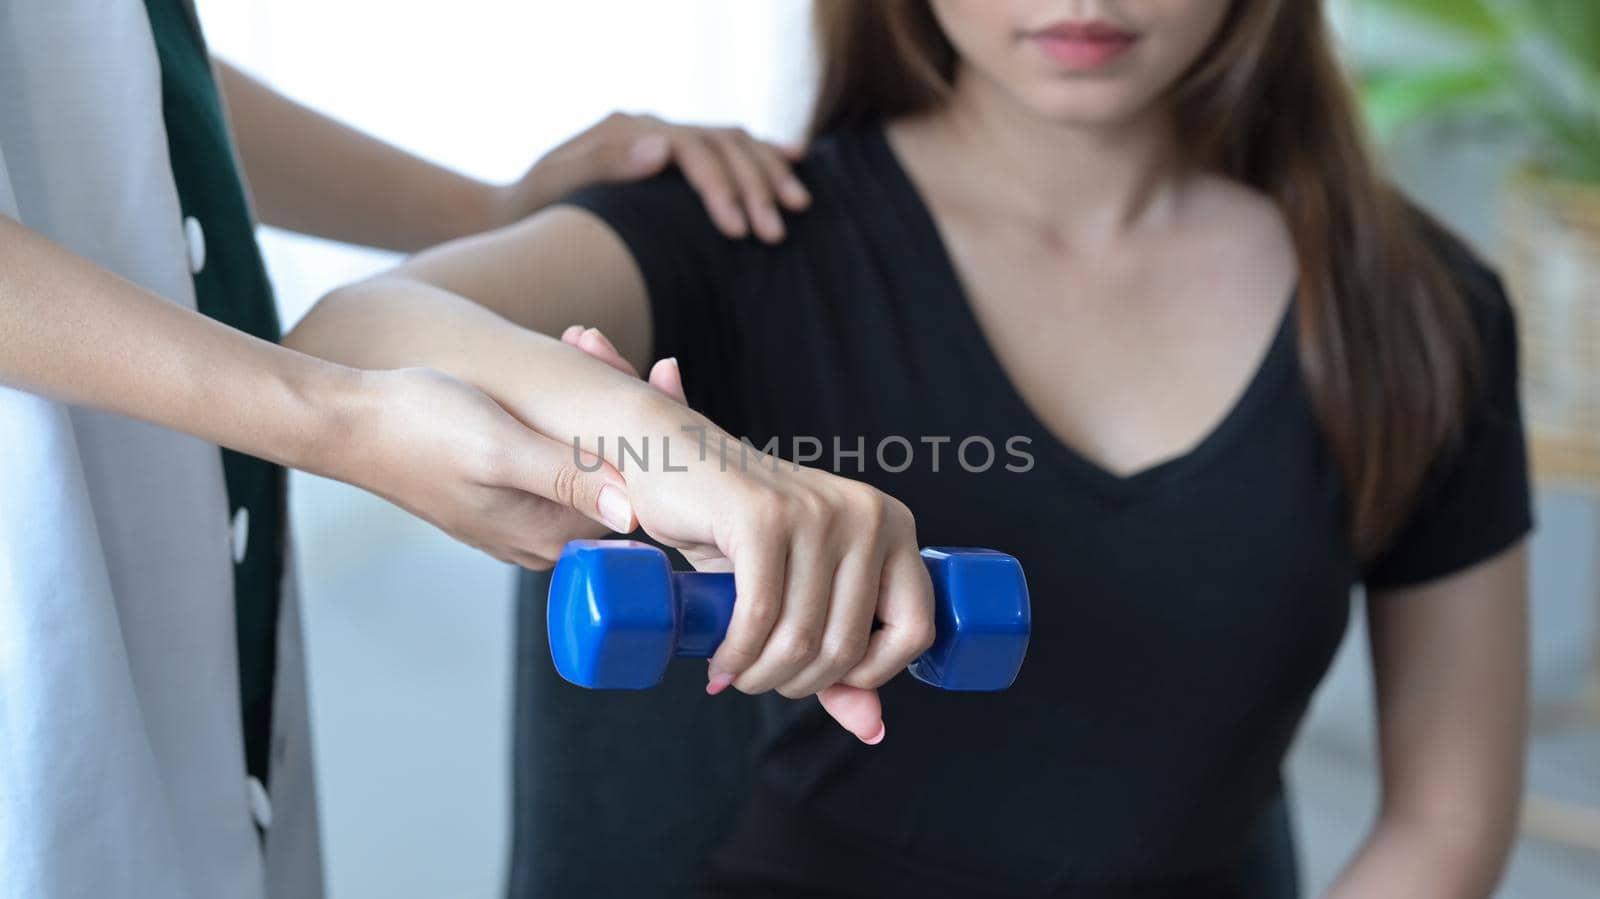 Physiotherapist giving exercise with dumbbell treatment about arm and shoulder of female patient. Physical therapy concept by prathanchorruangsak